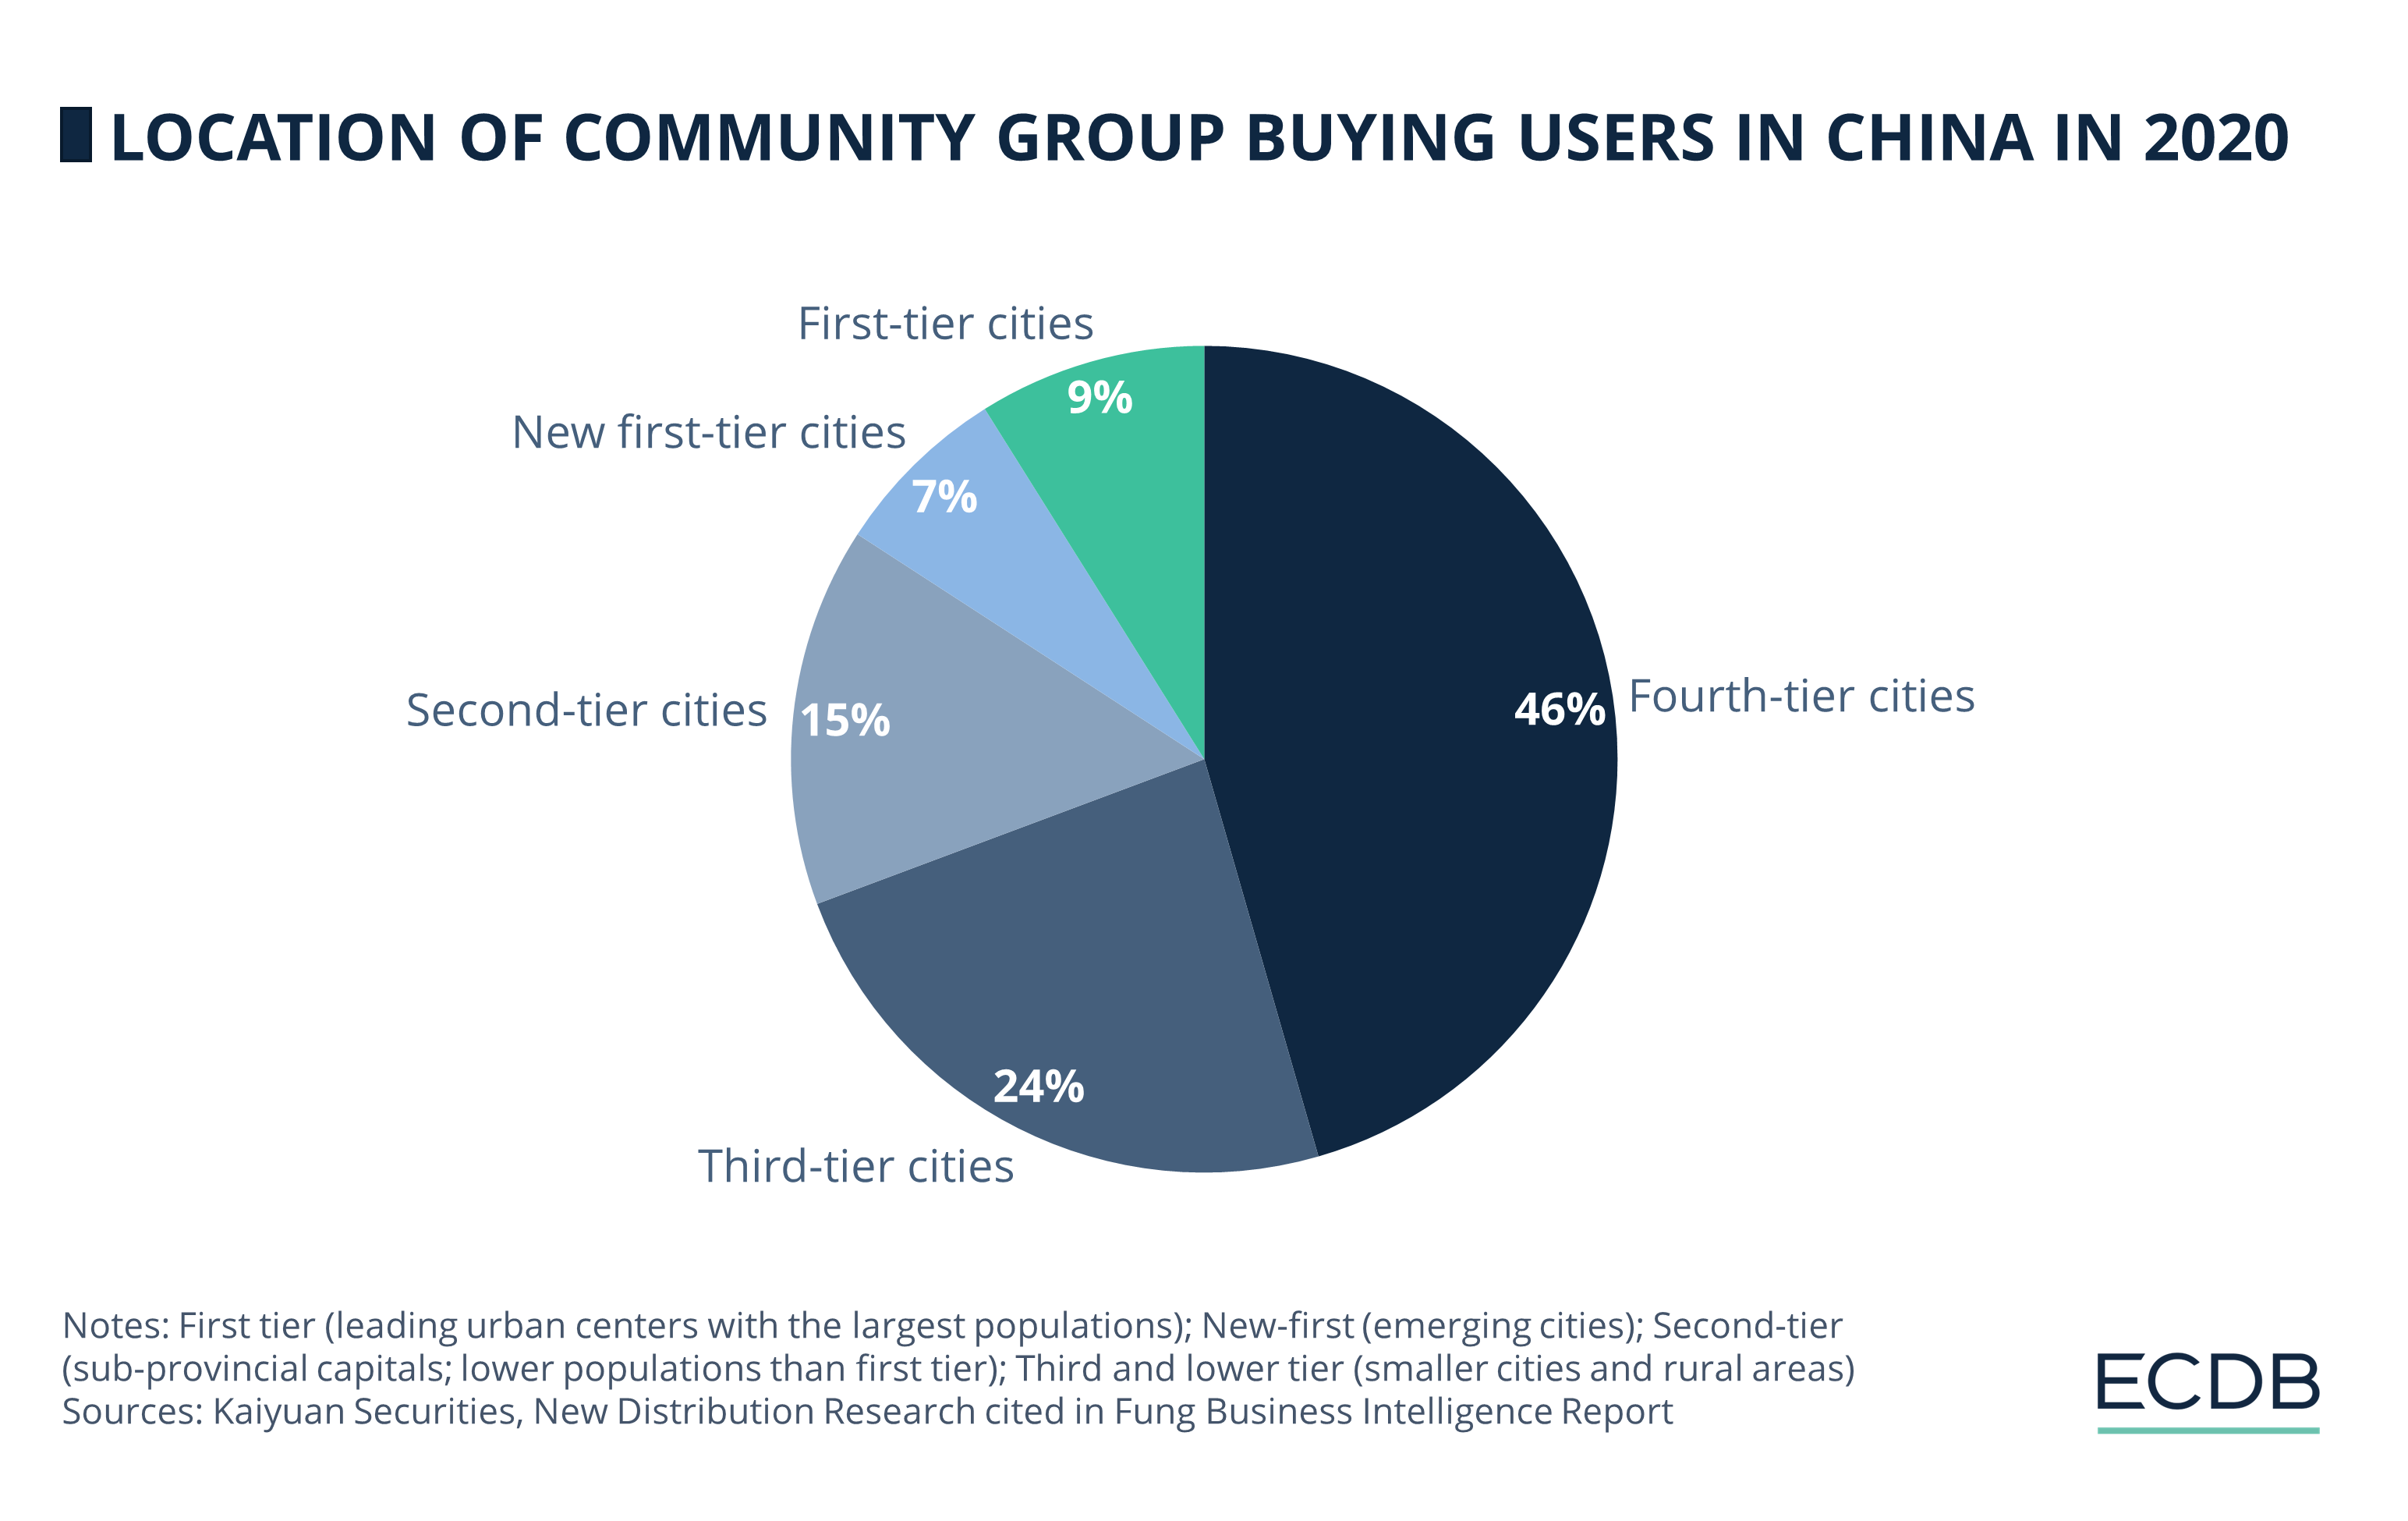 Location of Community Group Users in China in 2020